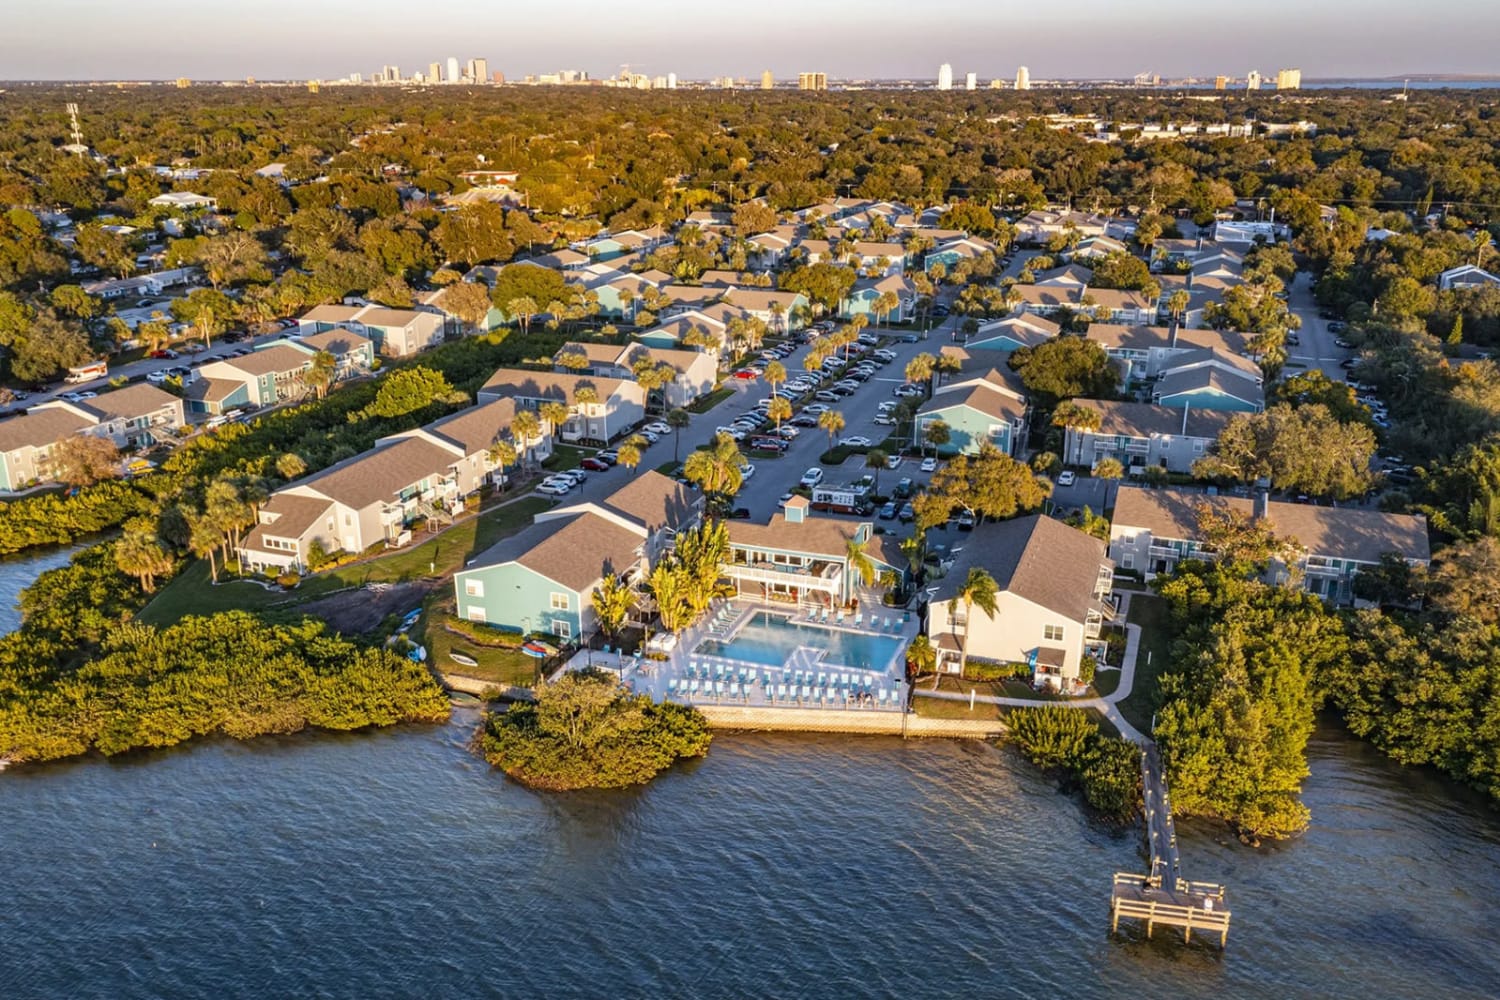 Aerial view of our property and the surrounding neighborhood at The Delmar in Tampa, Florida